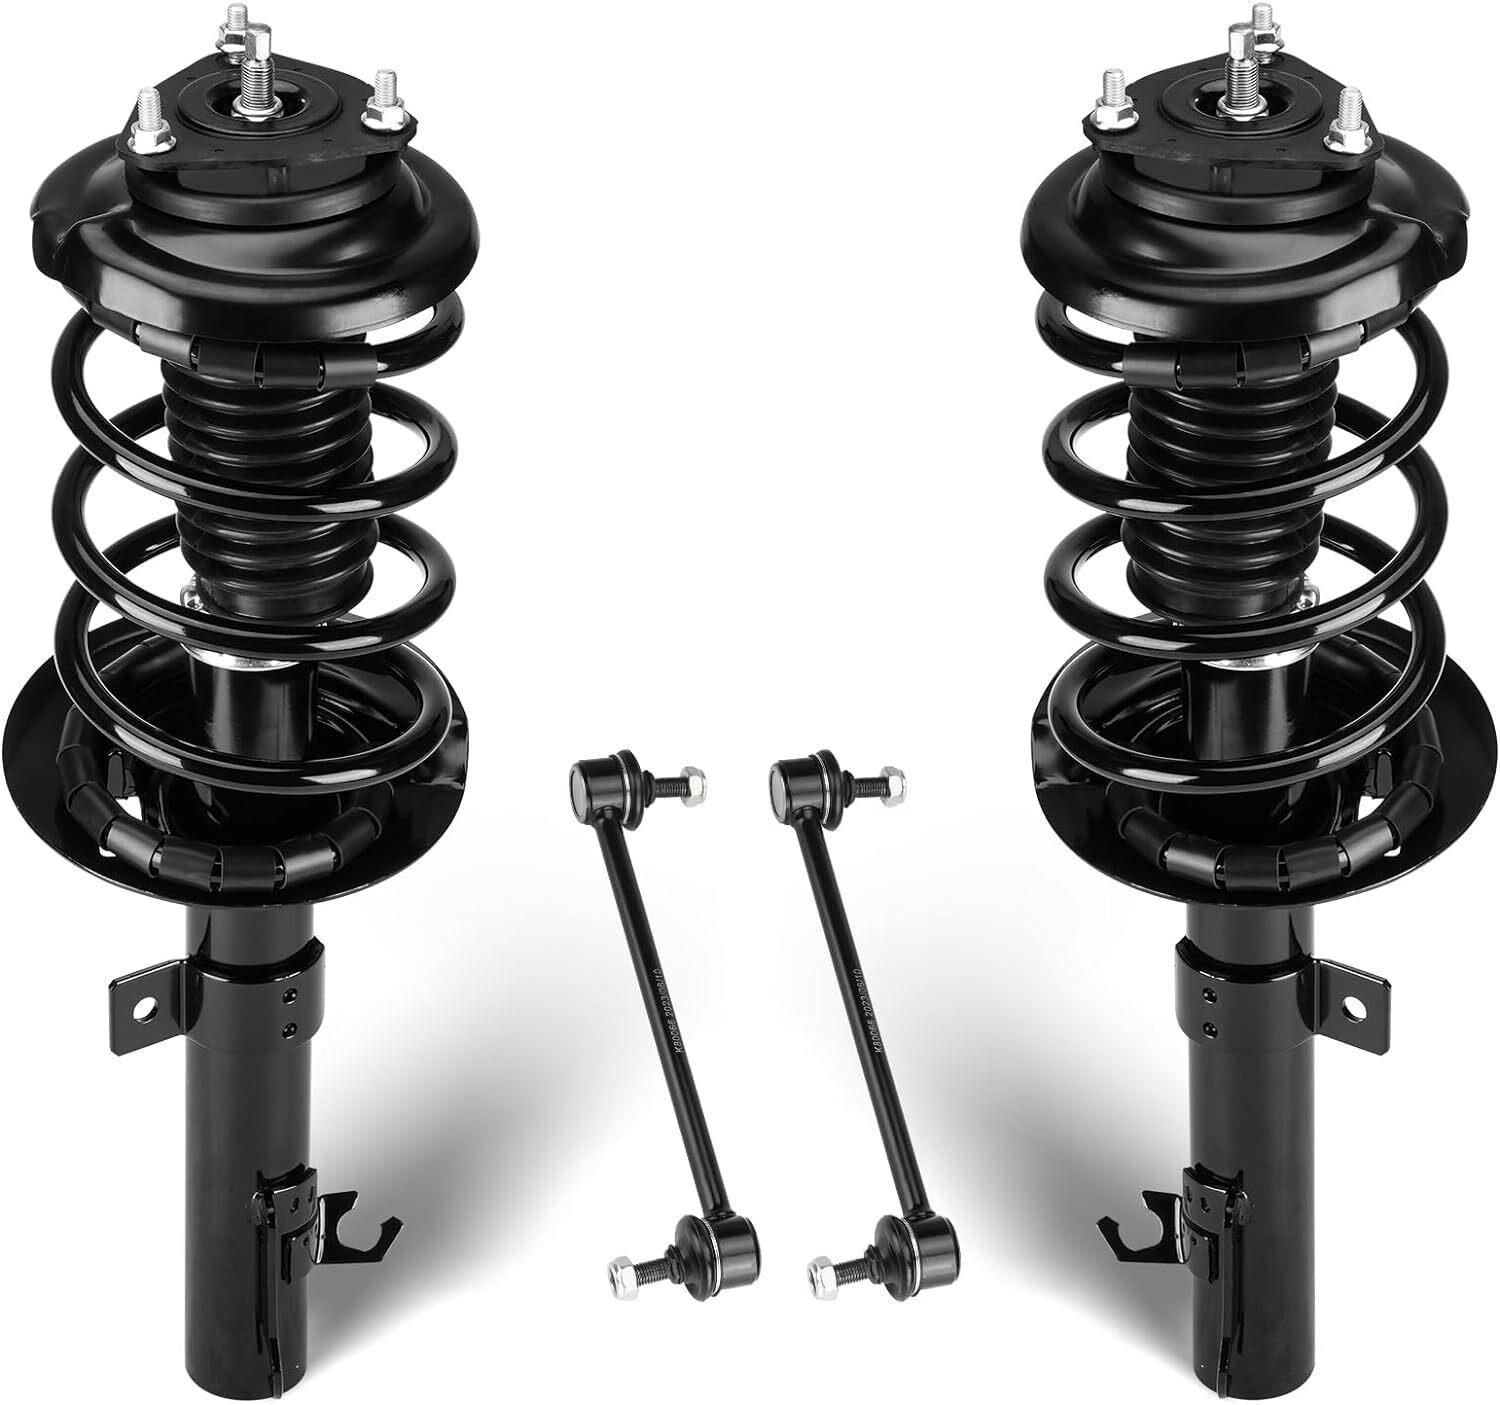 $119  Front Struts for 2006-2011 Ford Focus, 4Pcs